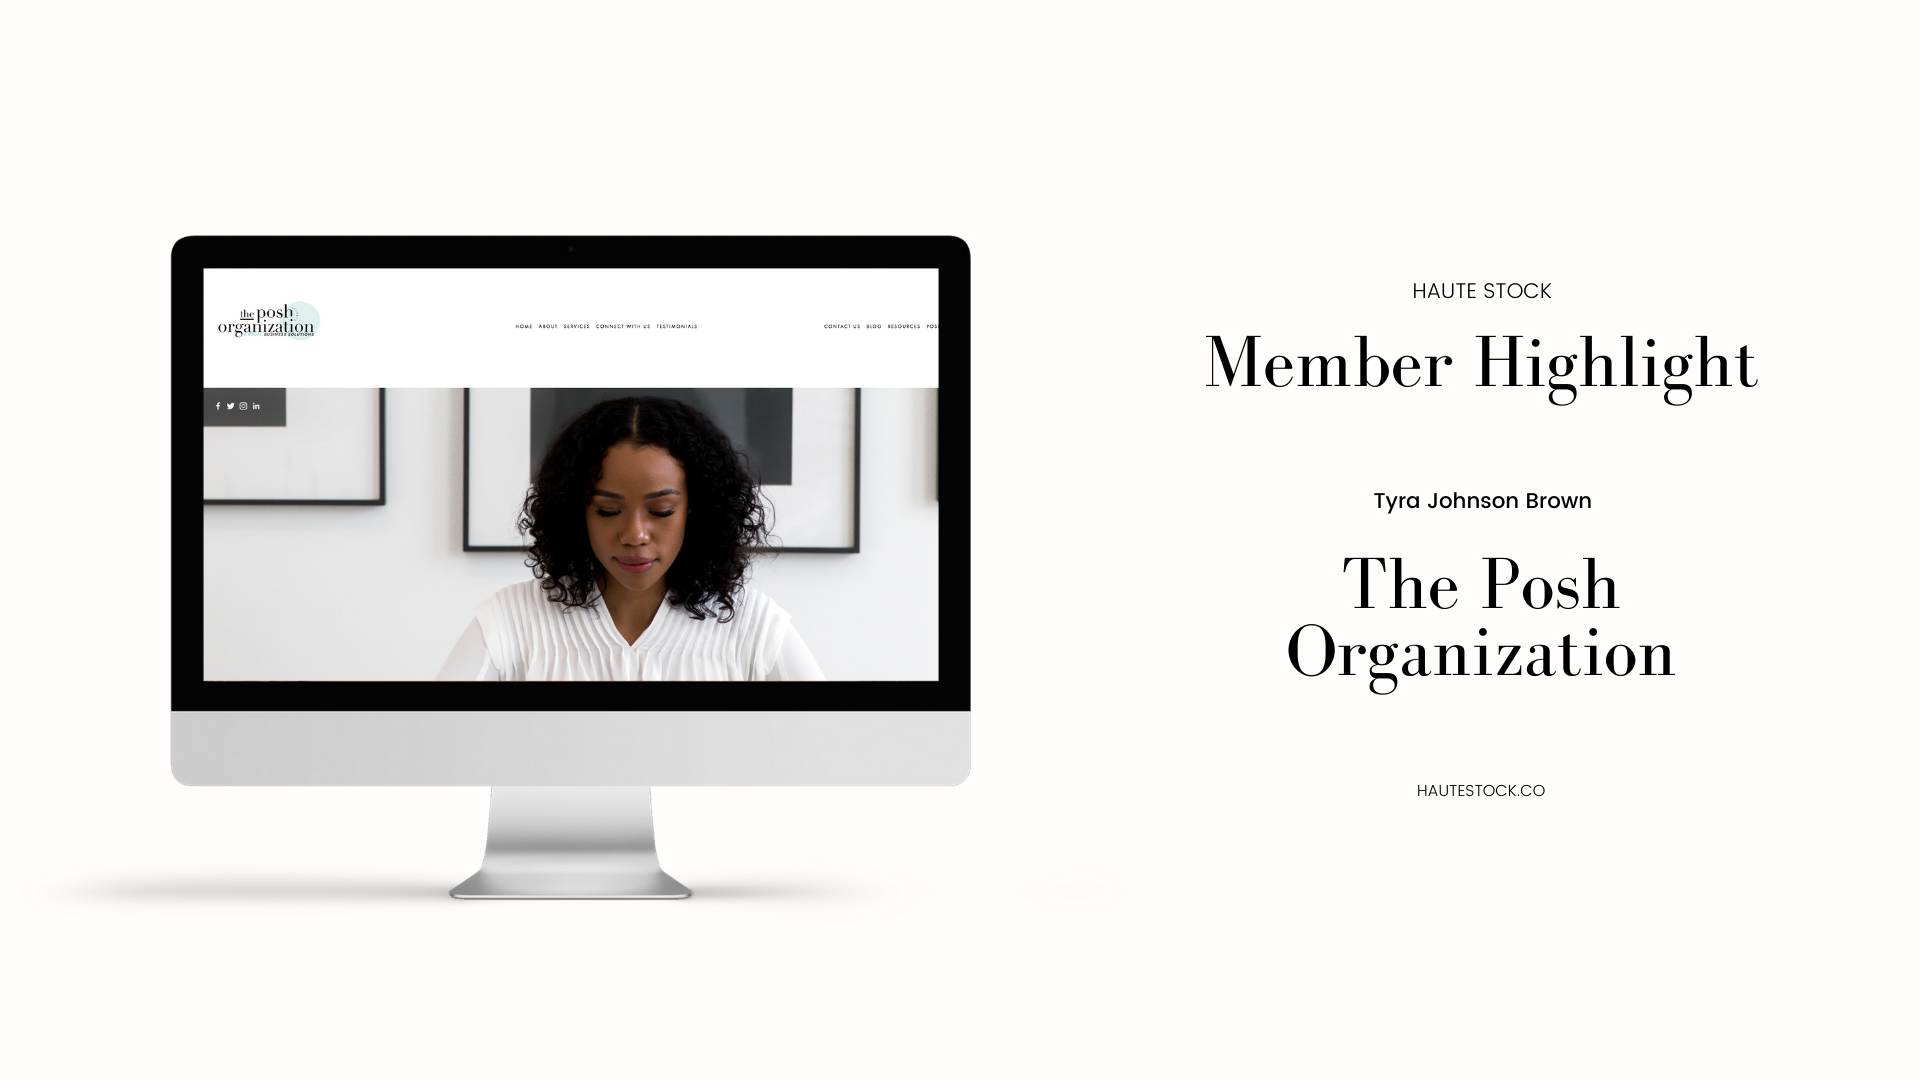 Haute Stock Member Feature of The Post Organization, led by CEO and Founder Tyra Johnson Brown. Learn more about Tyra and her story of entrepreneurship!